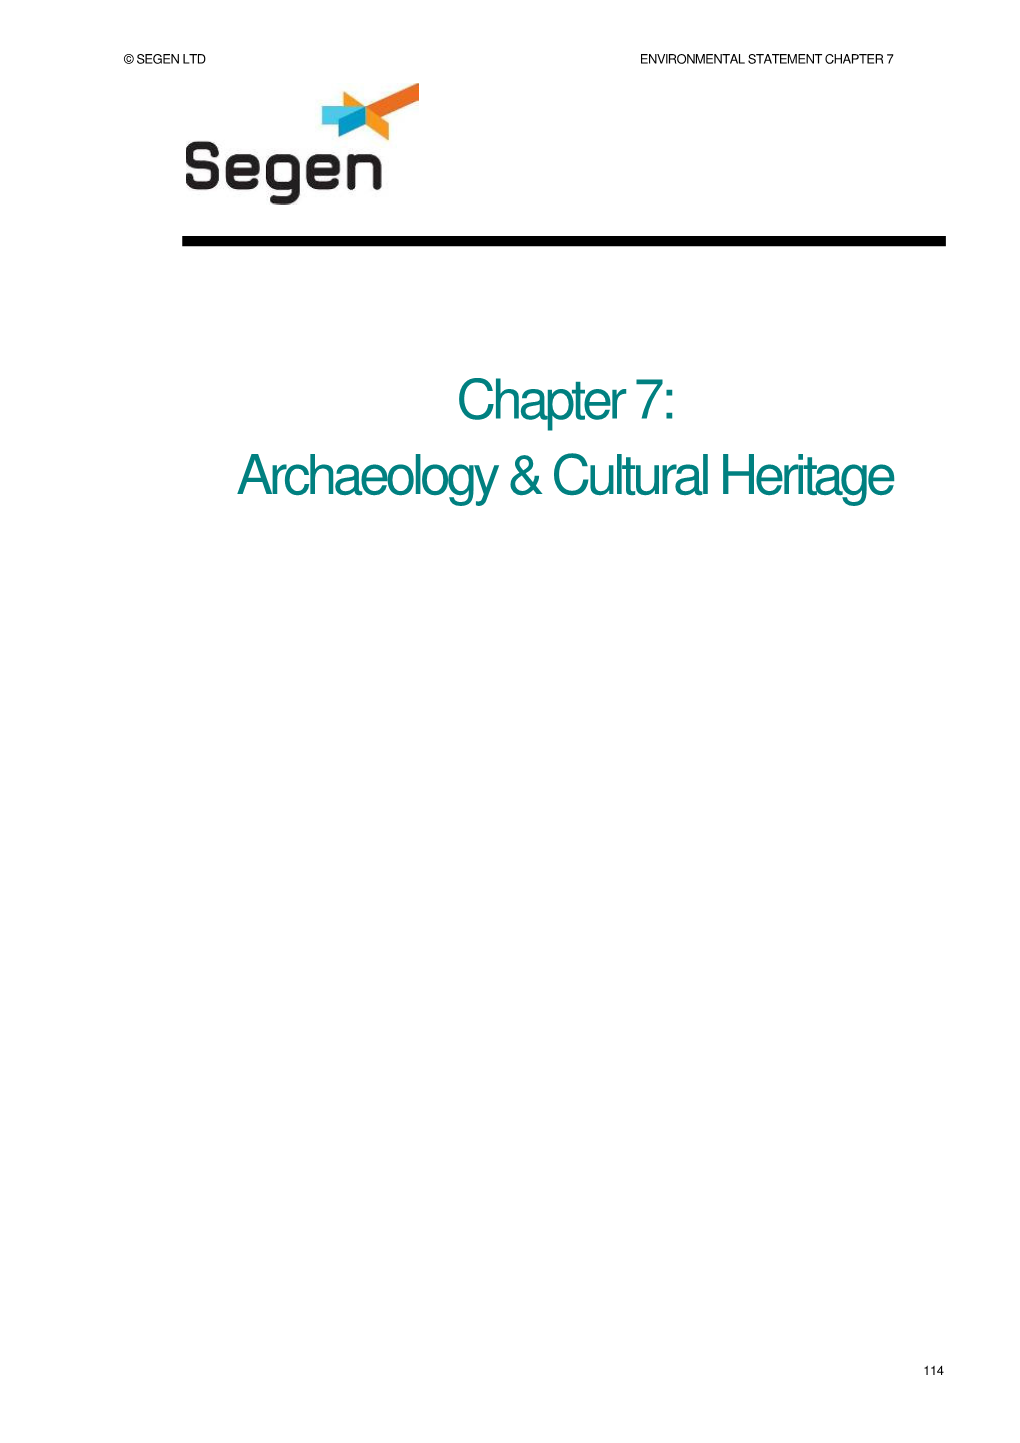 Chapter 7: Archaeology & Cultural Heritage